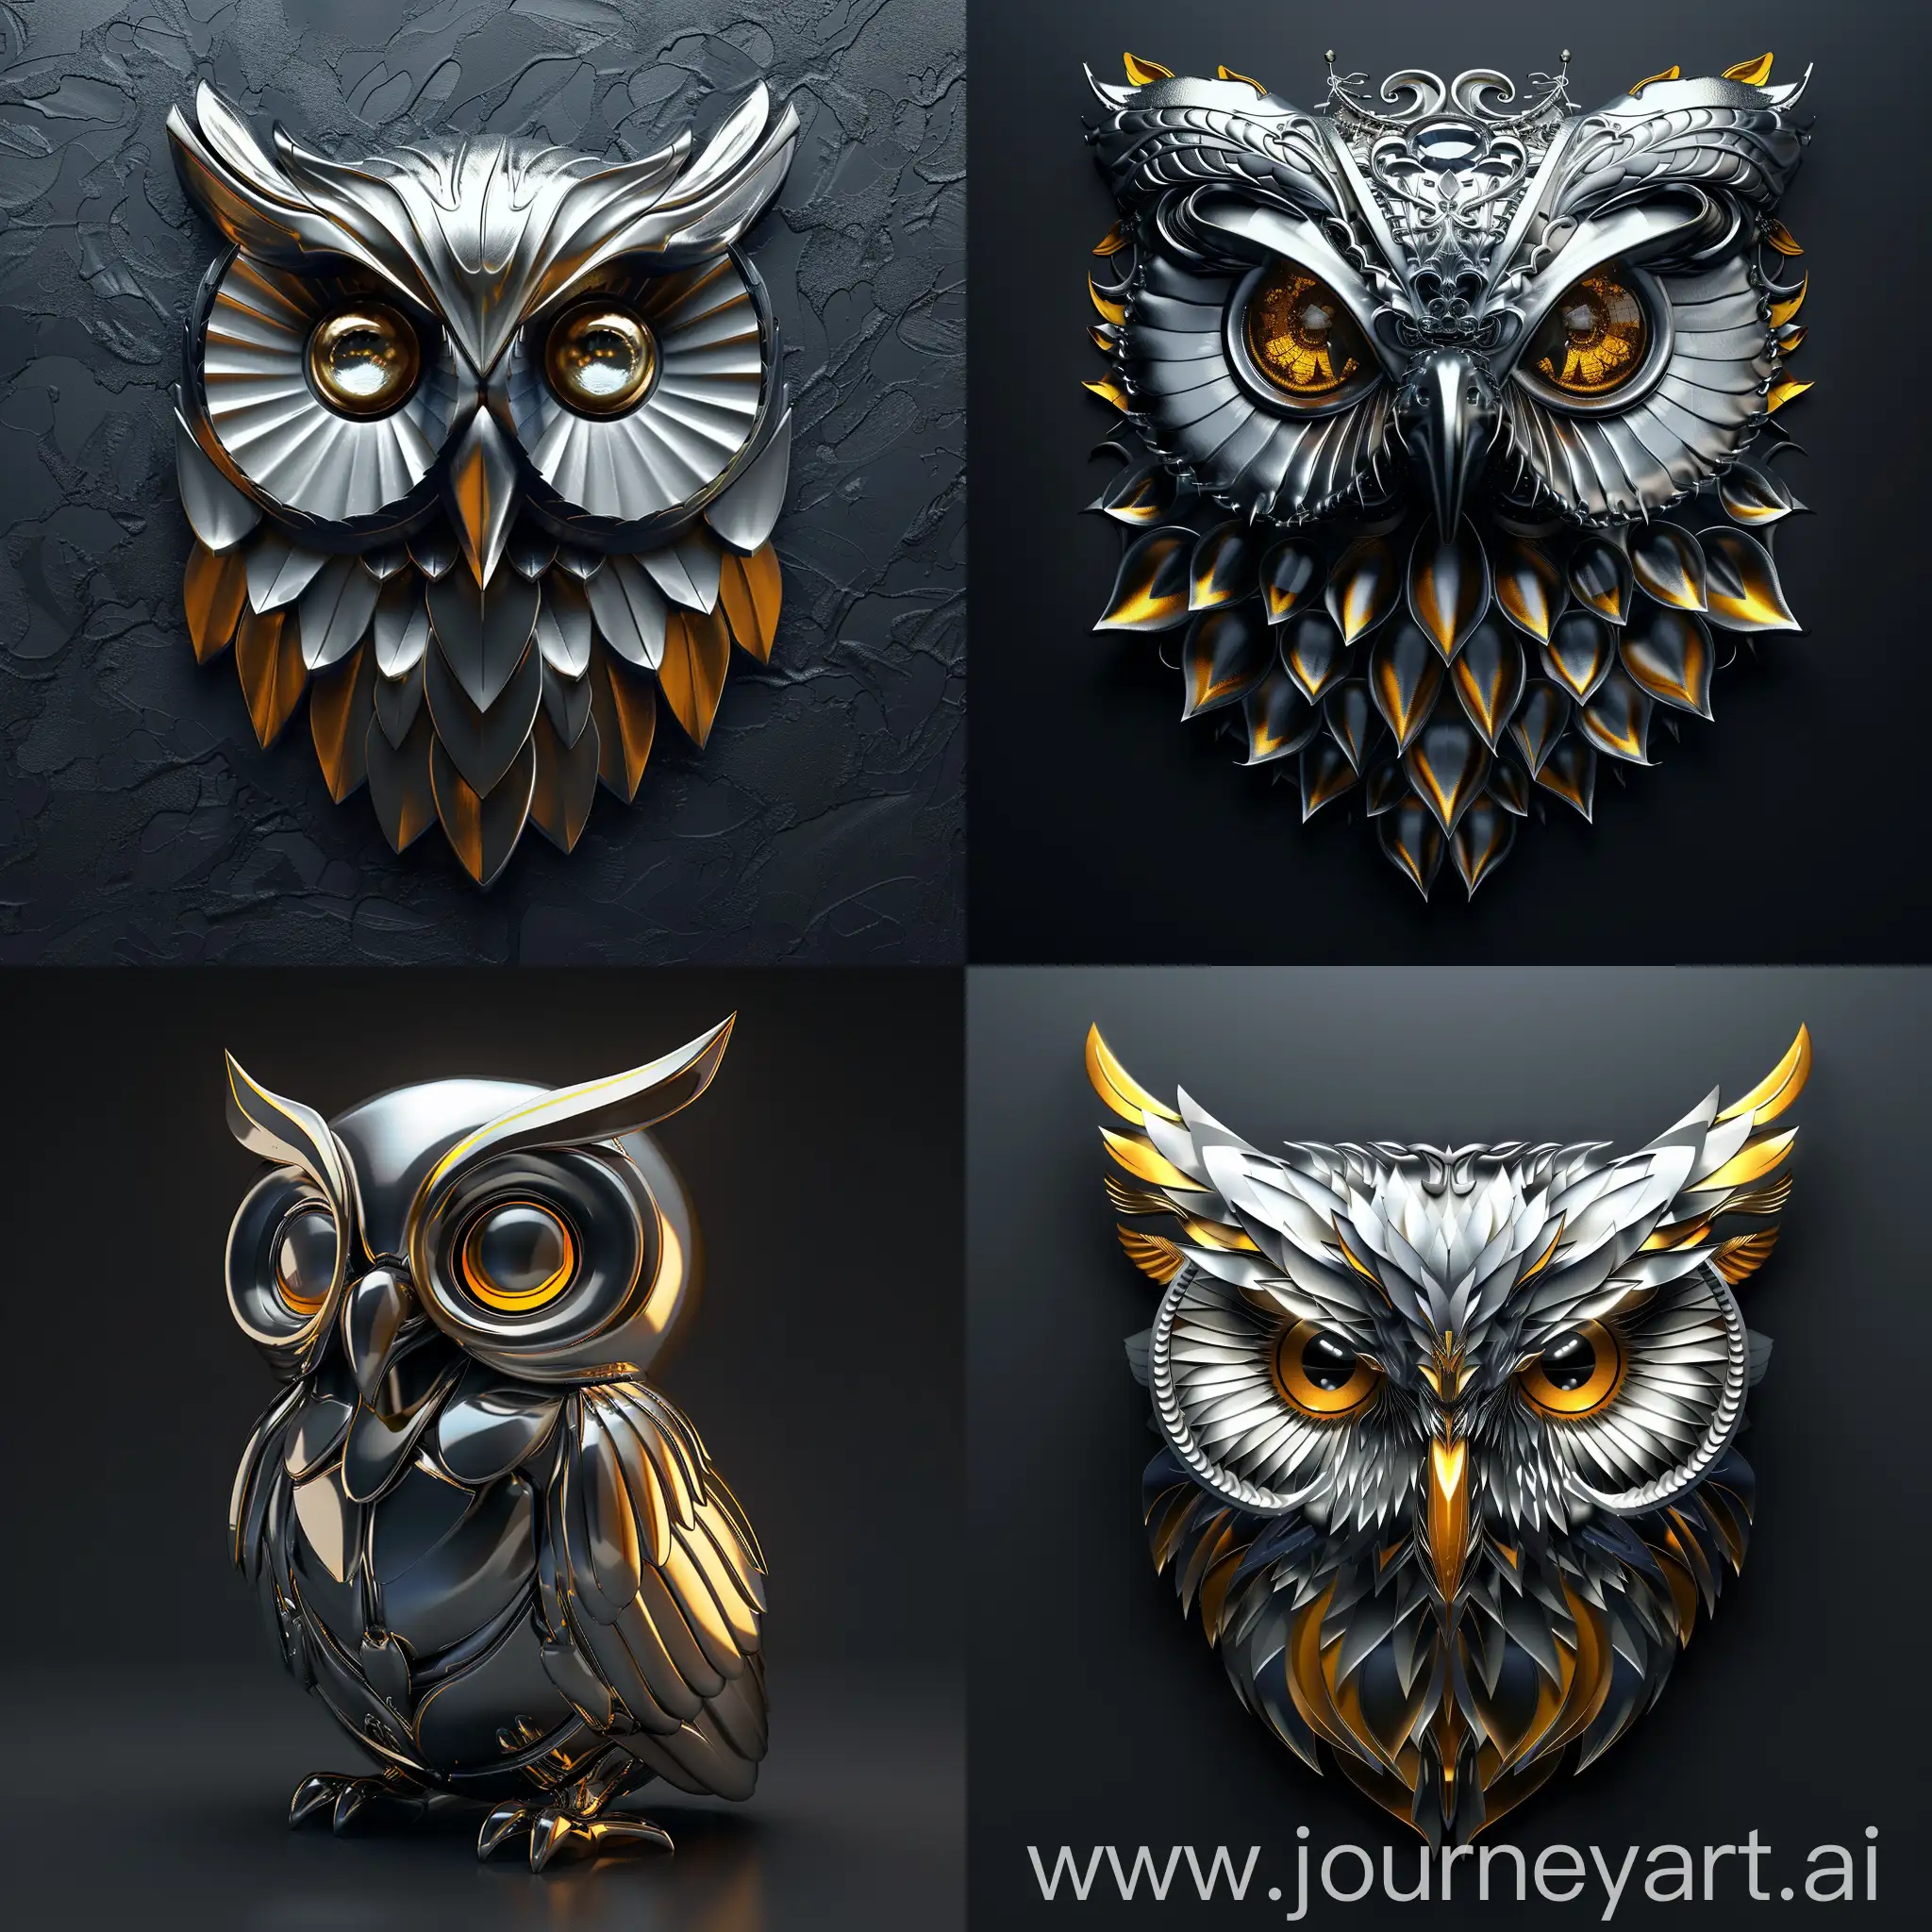 Realistic-Silver-Owl-Sculpture-with-Shiny-Yellow-Edges-on-Dark-Background